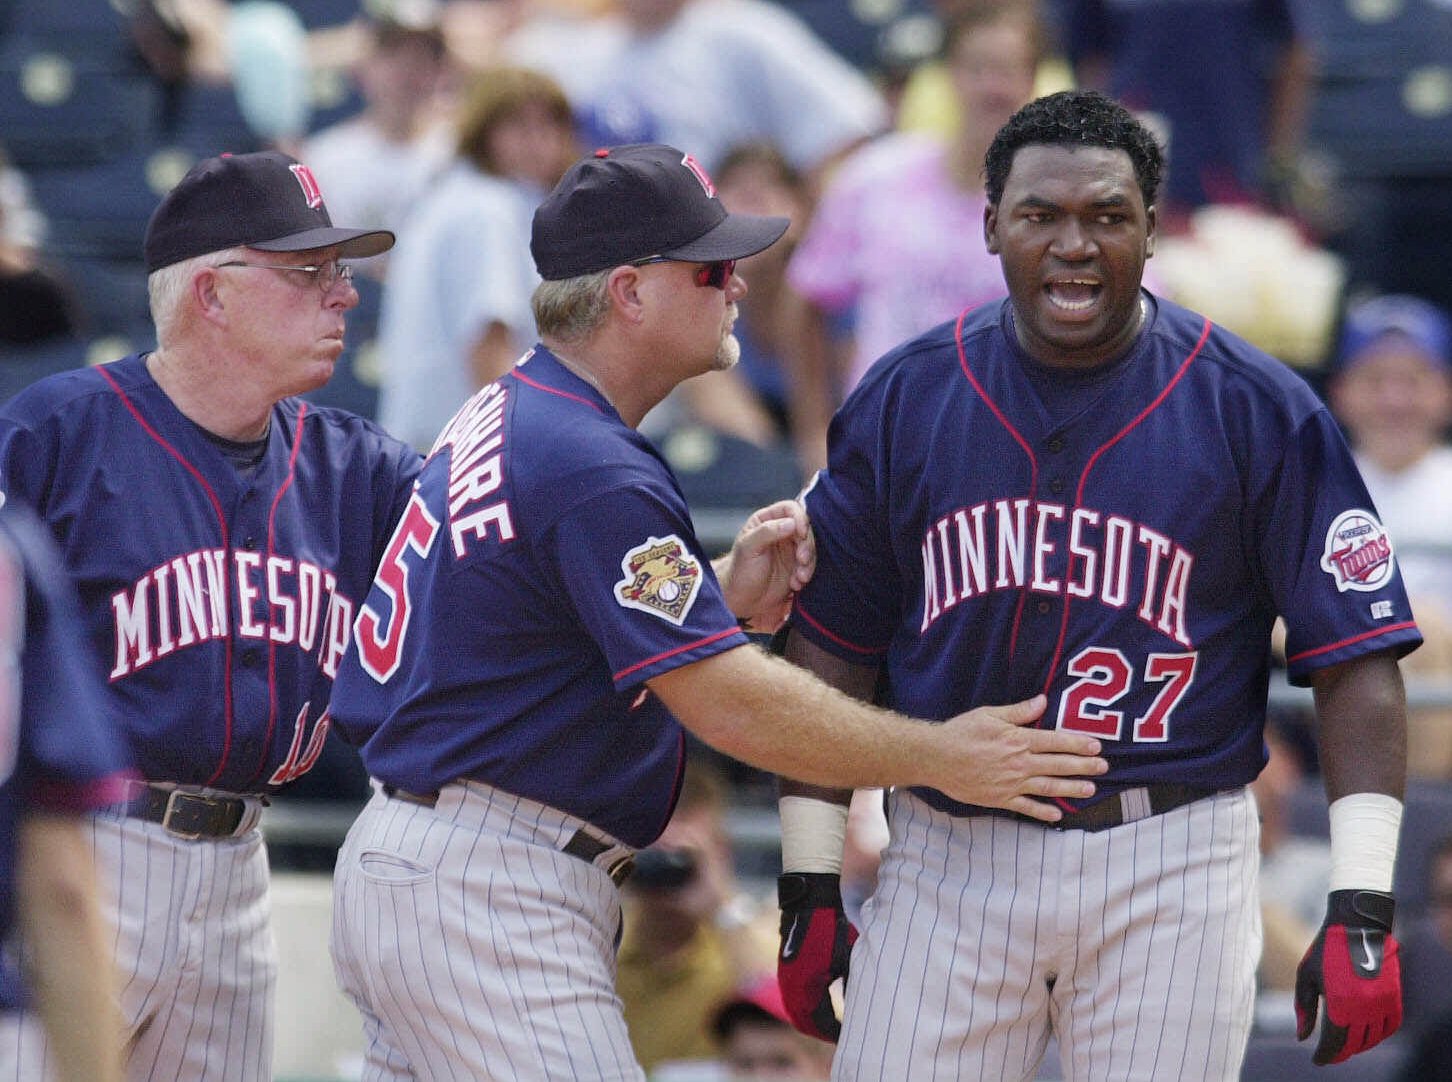 Minnesota Twins' David Ortiz, right, is moved toward the dugout by manager Tom Kelly, left, and third base coach Ron Gardenhire, center, after being ejected for arguing strike calls with plate umpire Paul Schrieber during a 2001 game in Kansas City. Photo: Ed Zurga | Associated Press